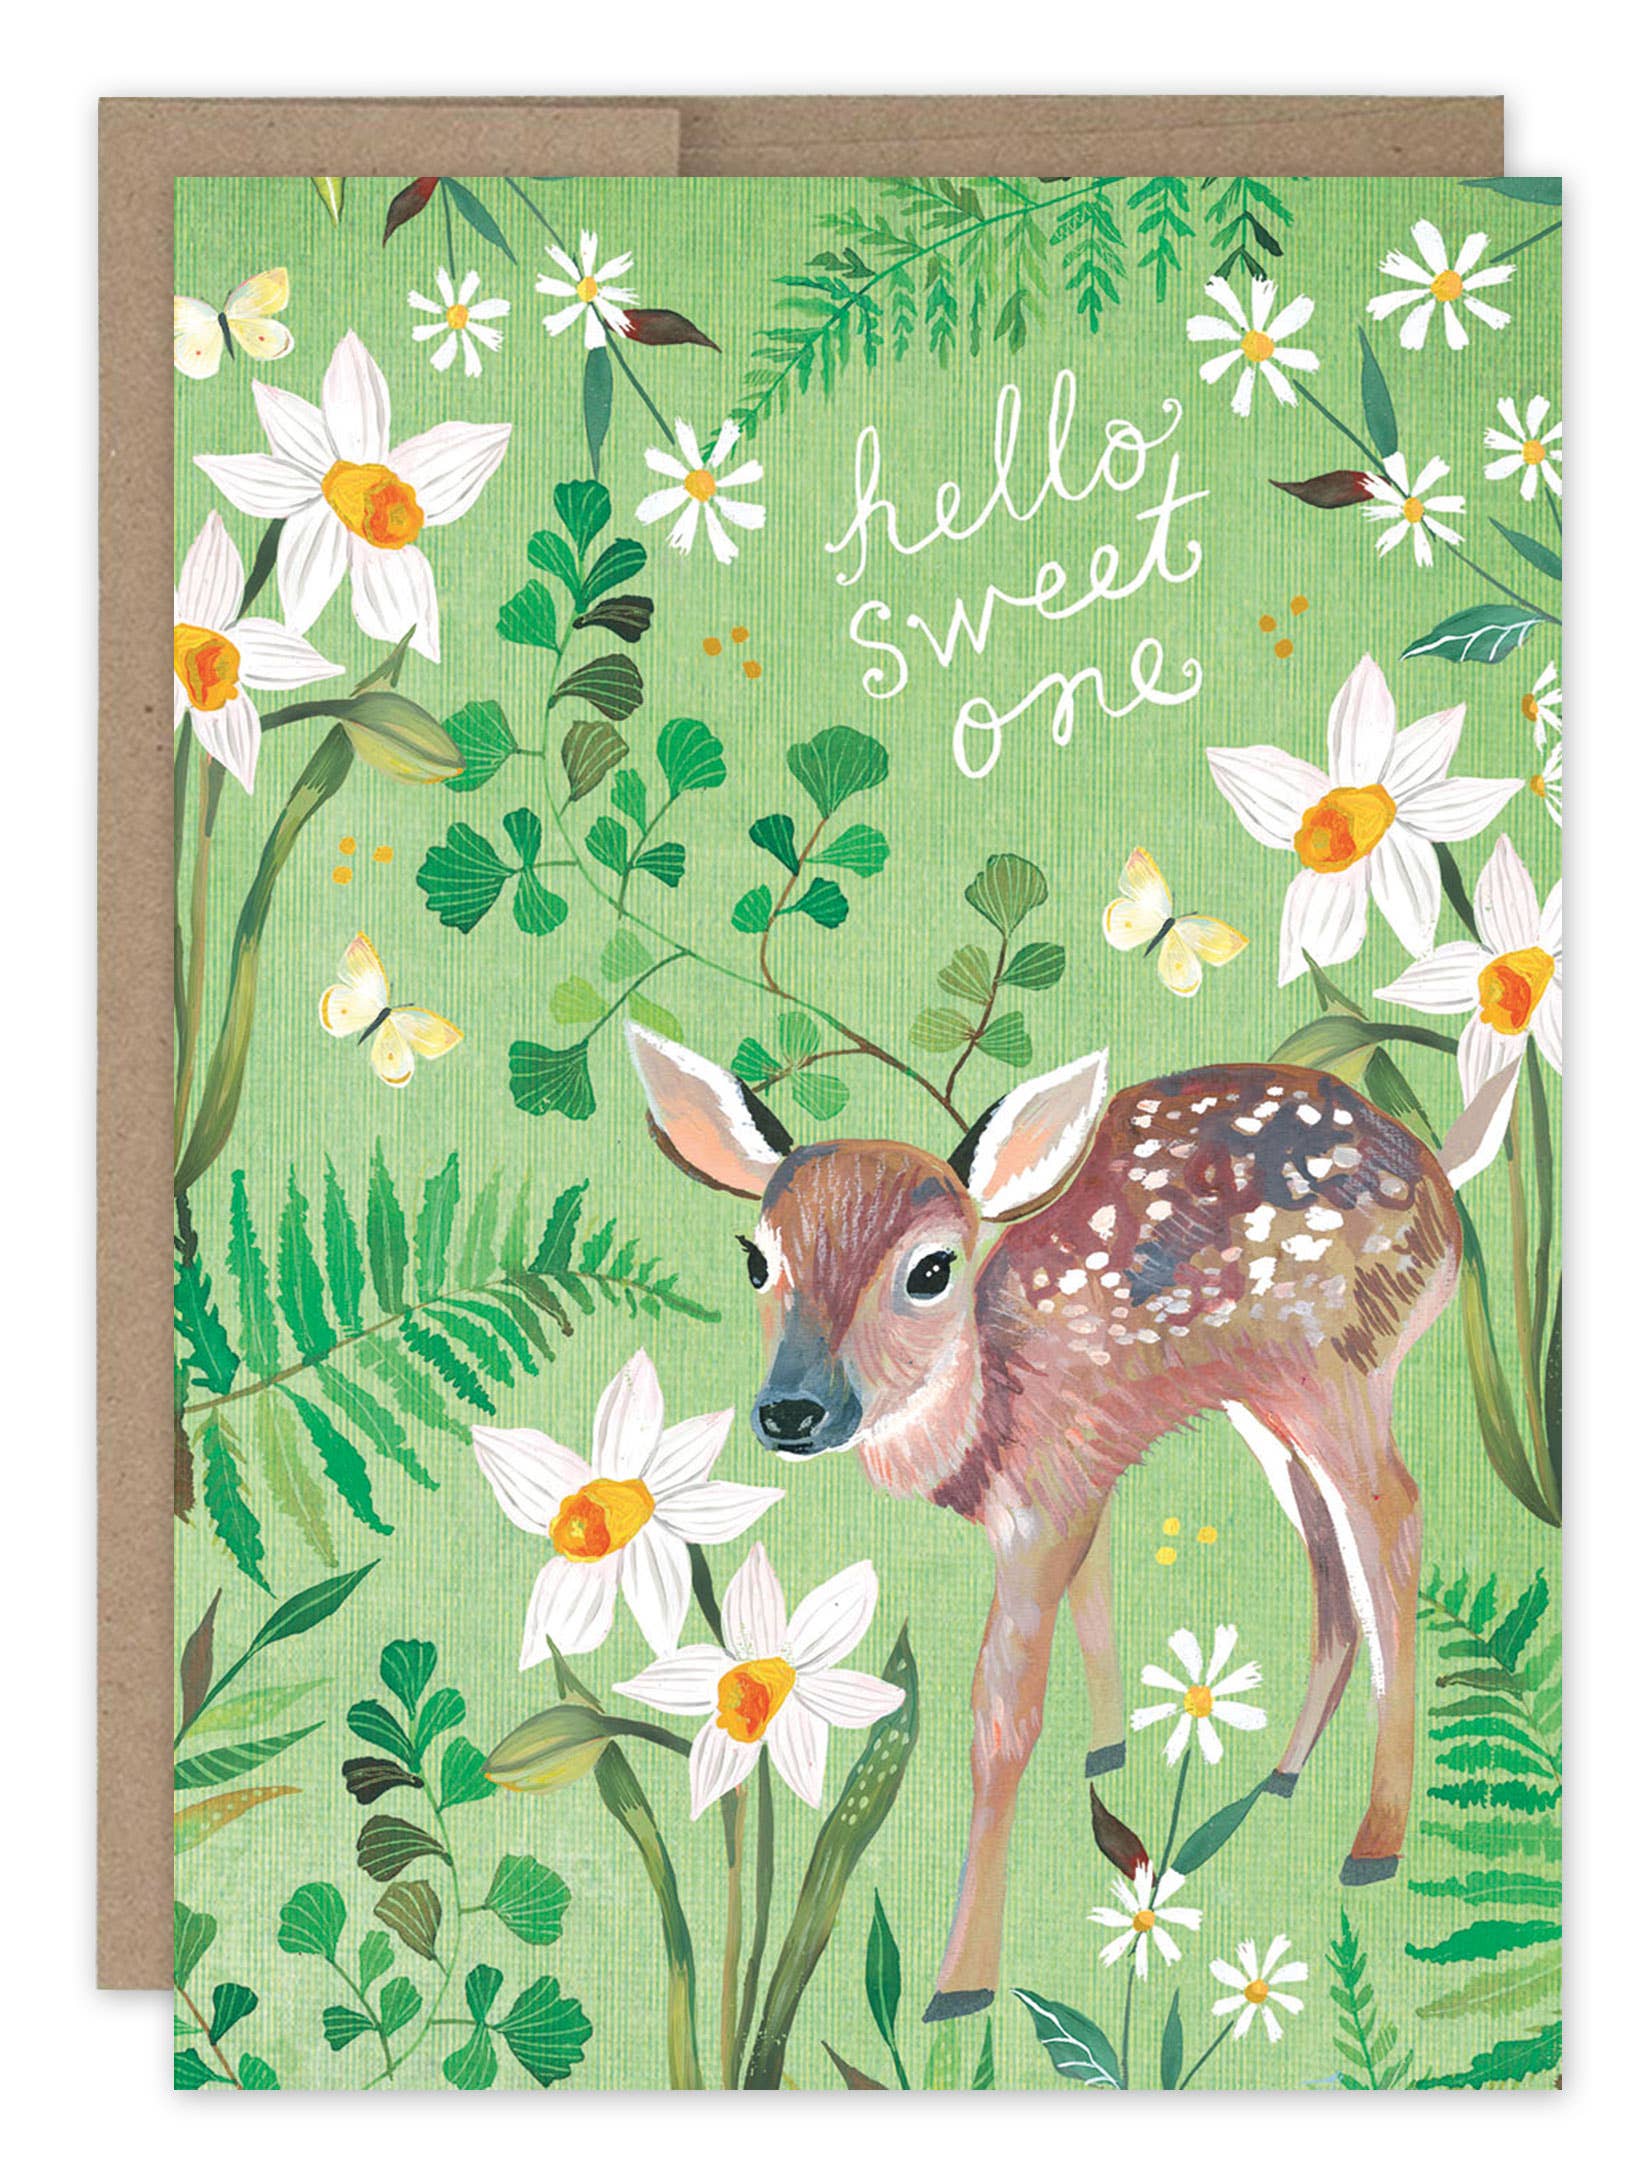 Fawn New Baby Card